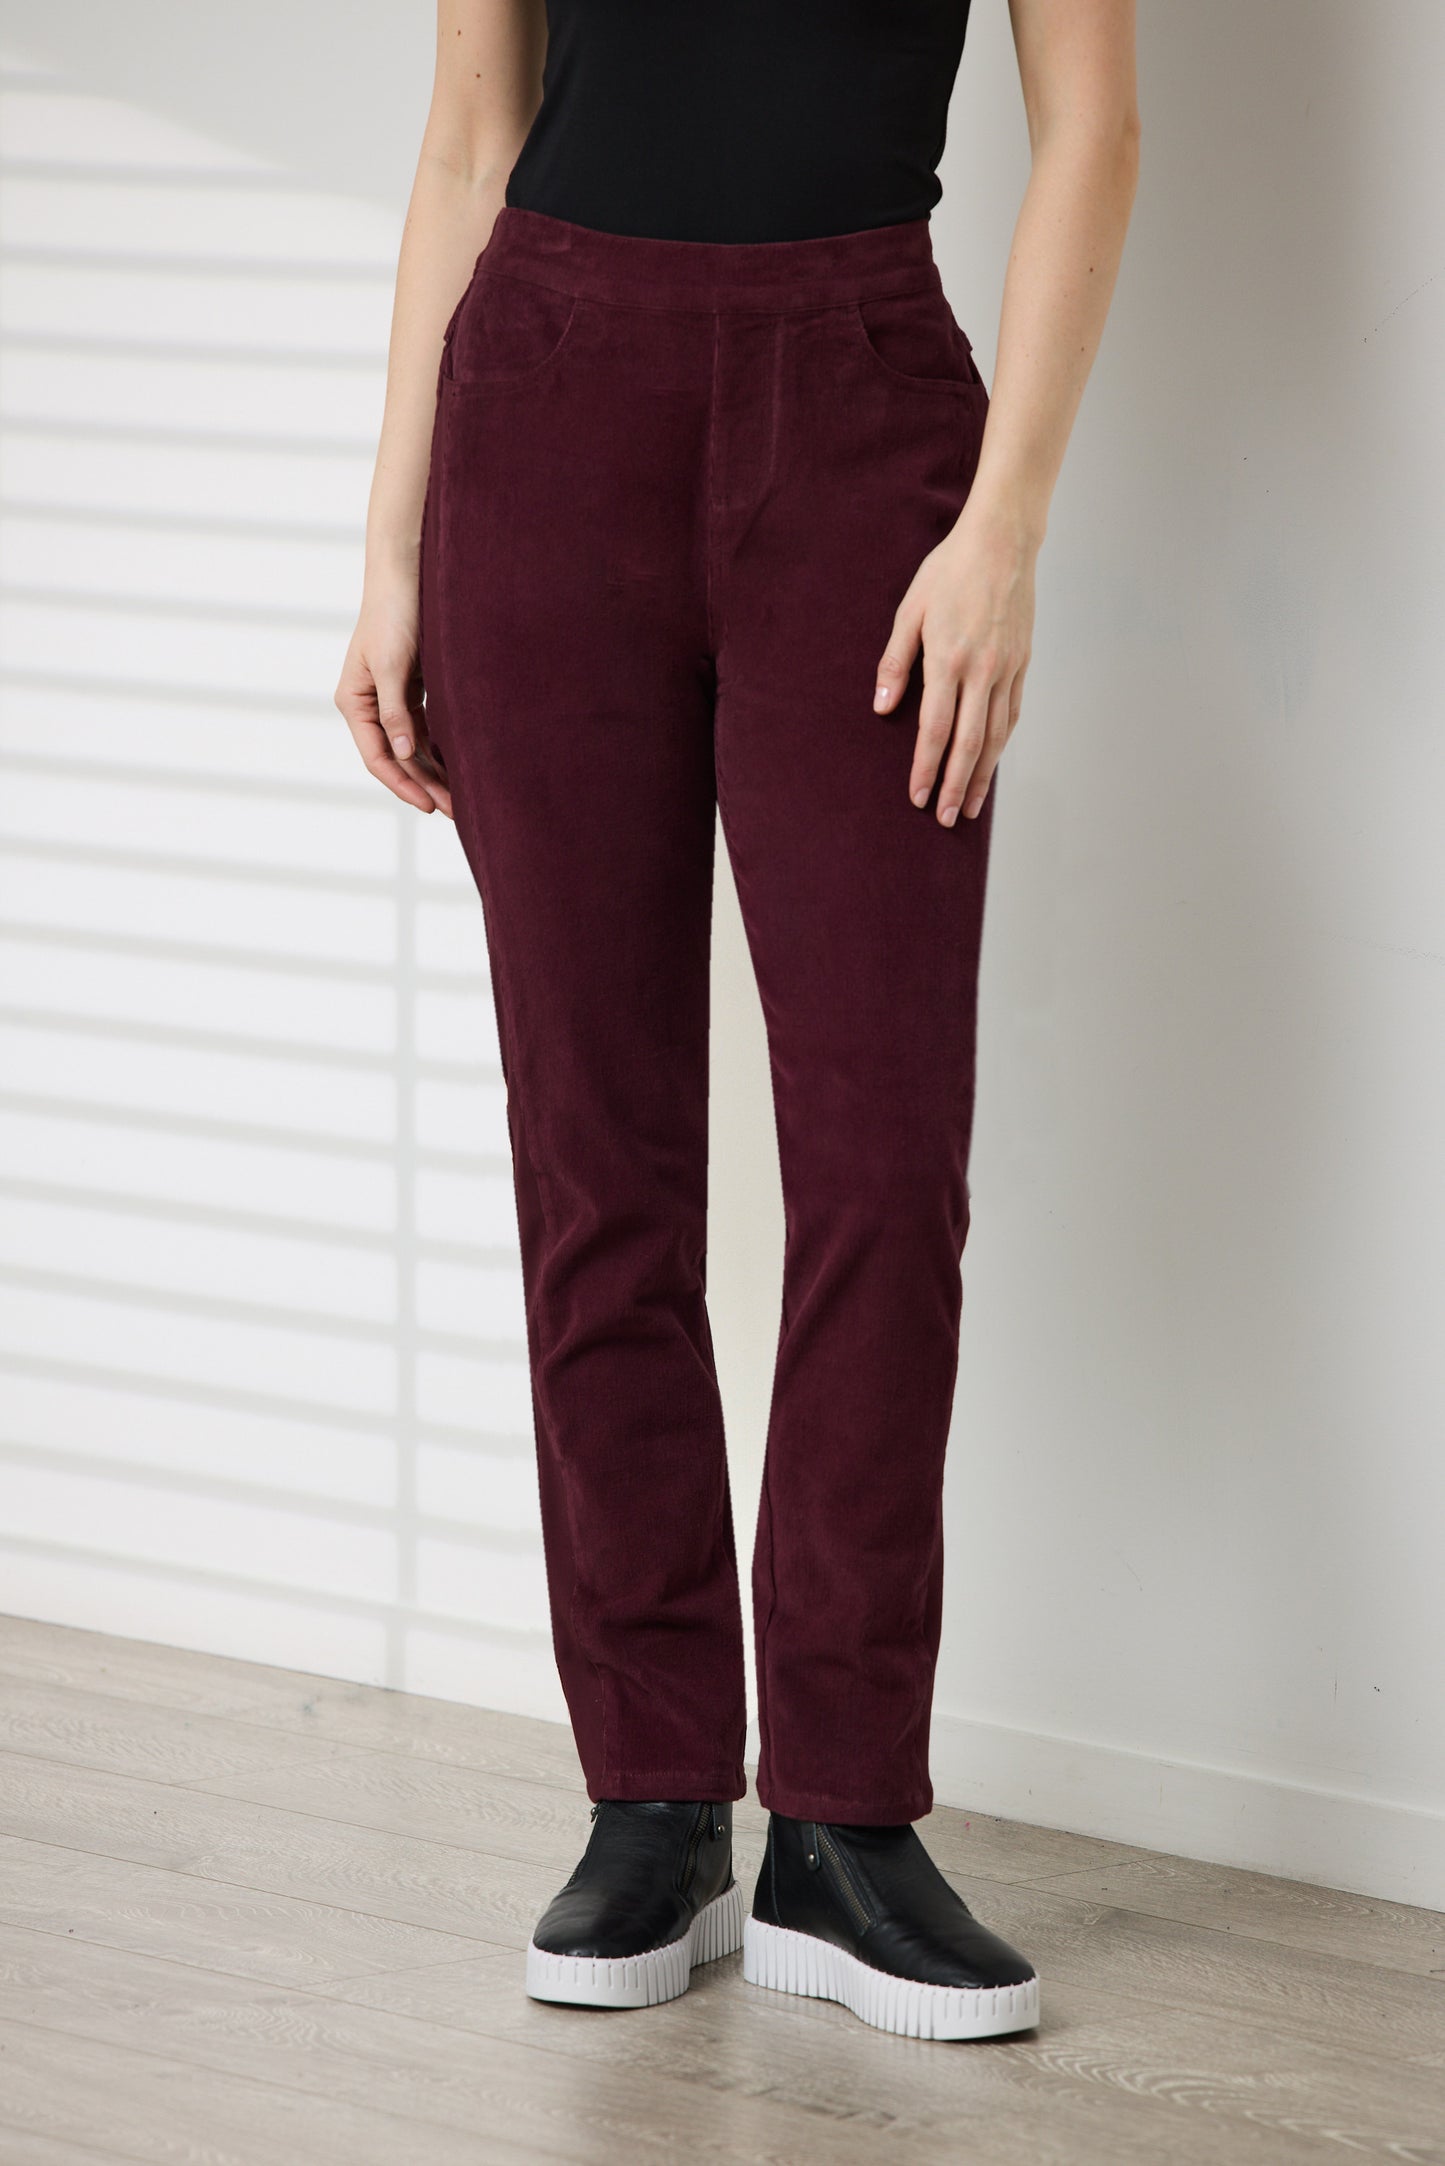 Newport - Vale Cord Pant Pull On - NP27782 - Wine - INSTORE